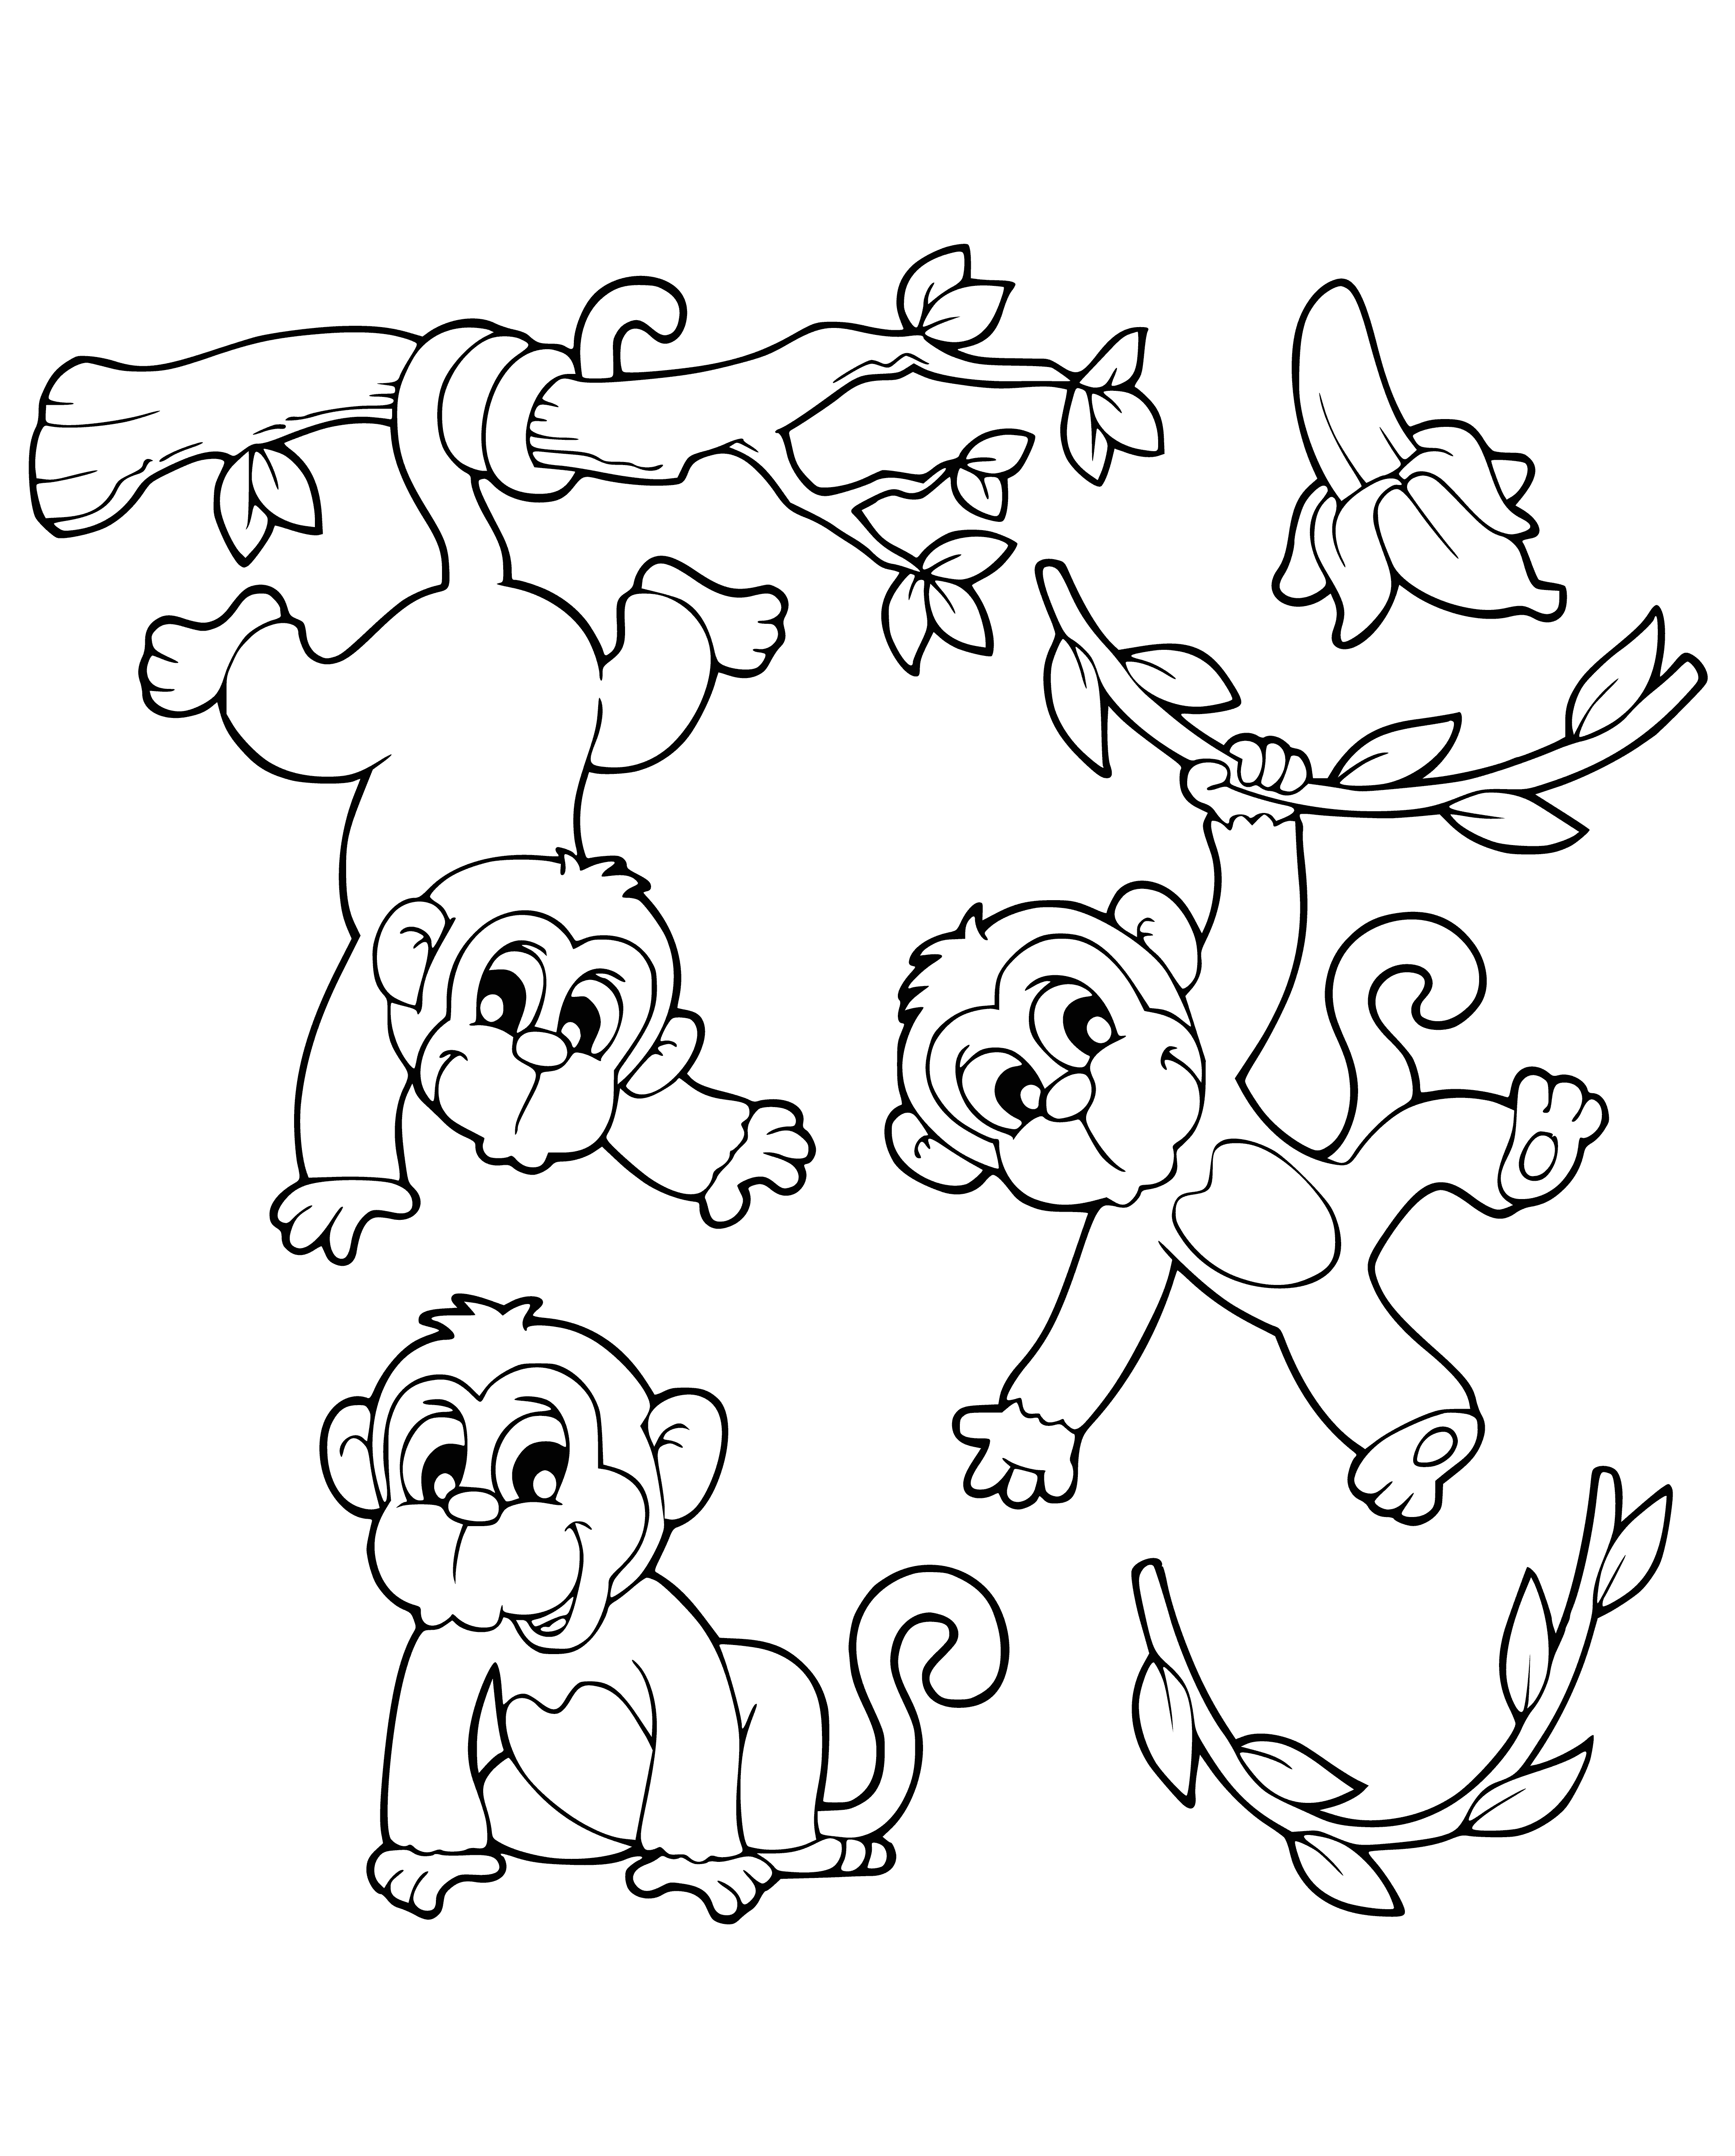 coloring page: Two monkeys on a branch; one eating a banana and one looking at it.